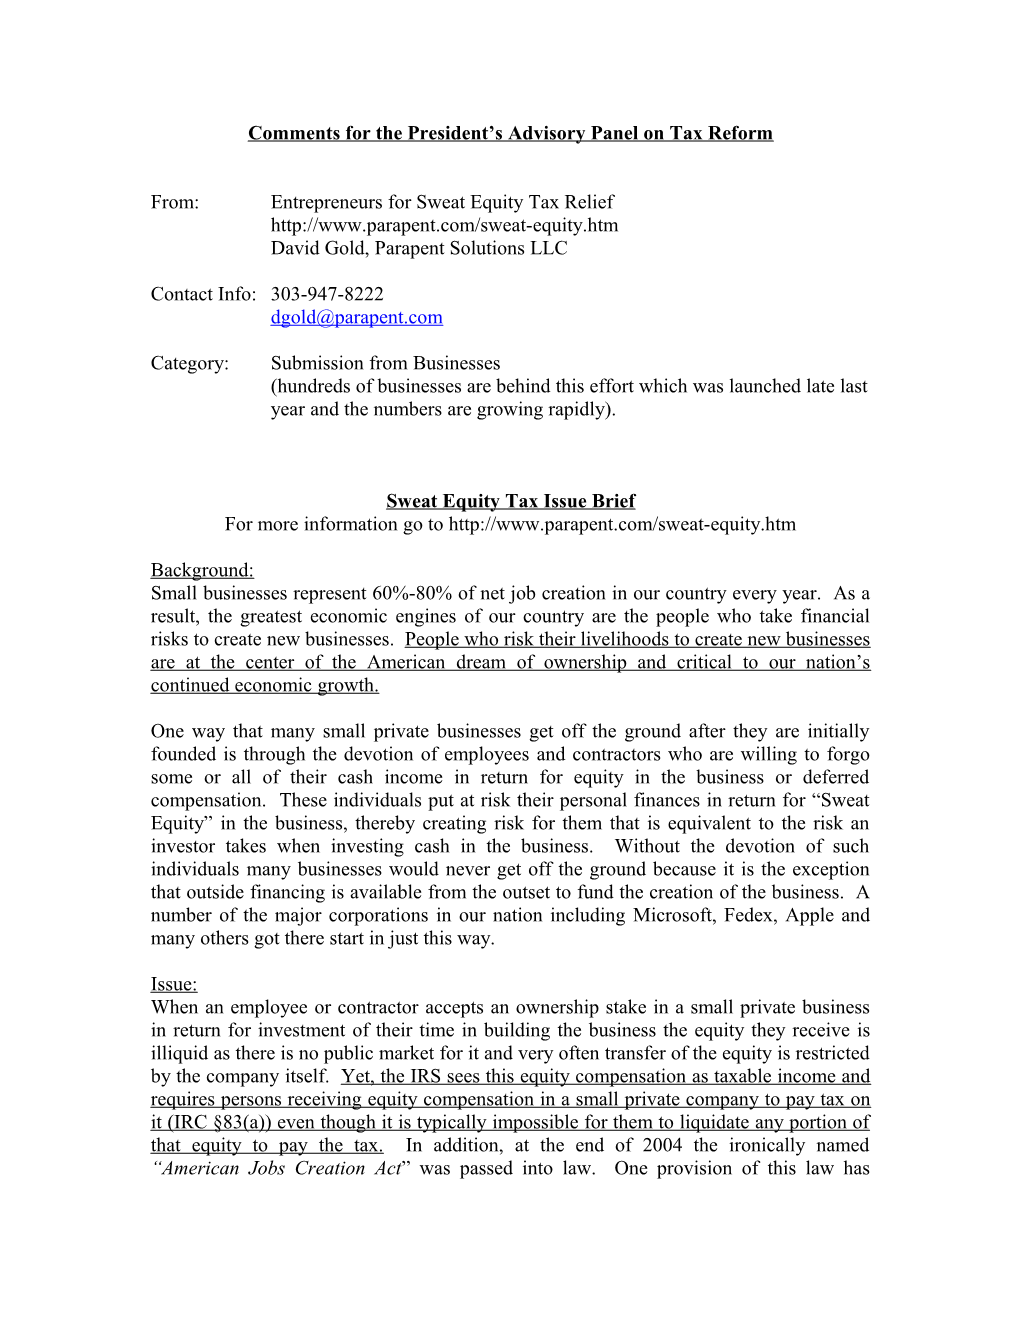 Sweat Equity Tax Issue Brief